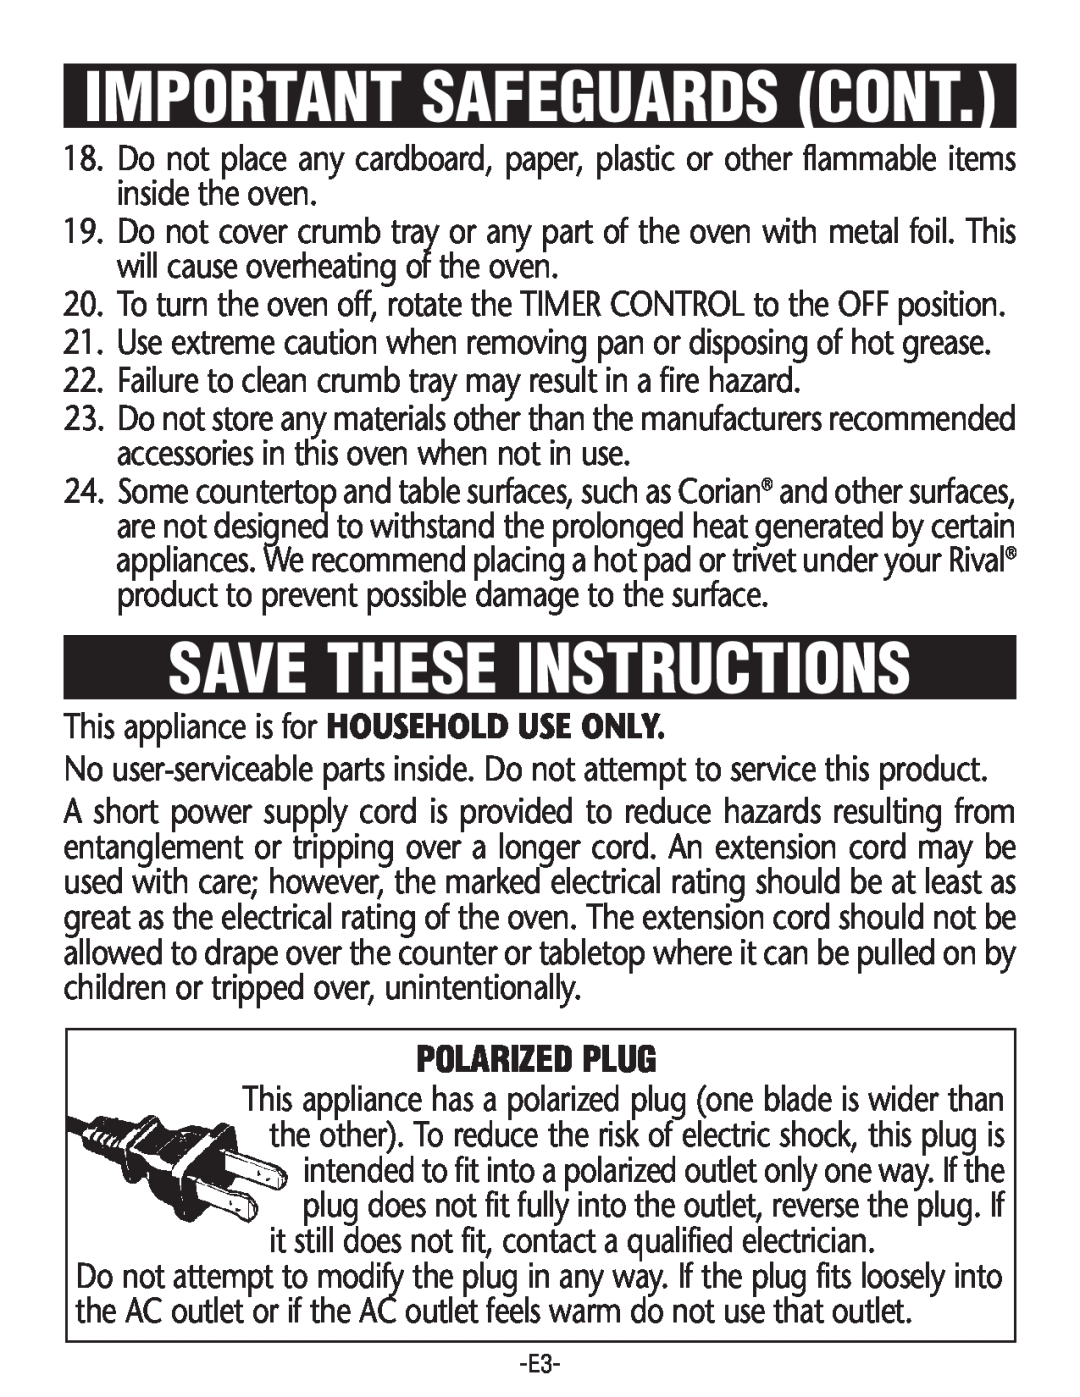 Rival CO602 manual Polarized Plug, Save These Instructions, Important Safeguards Cont 